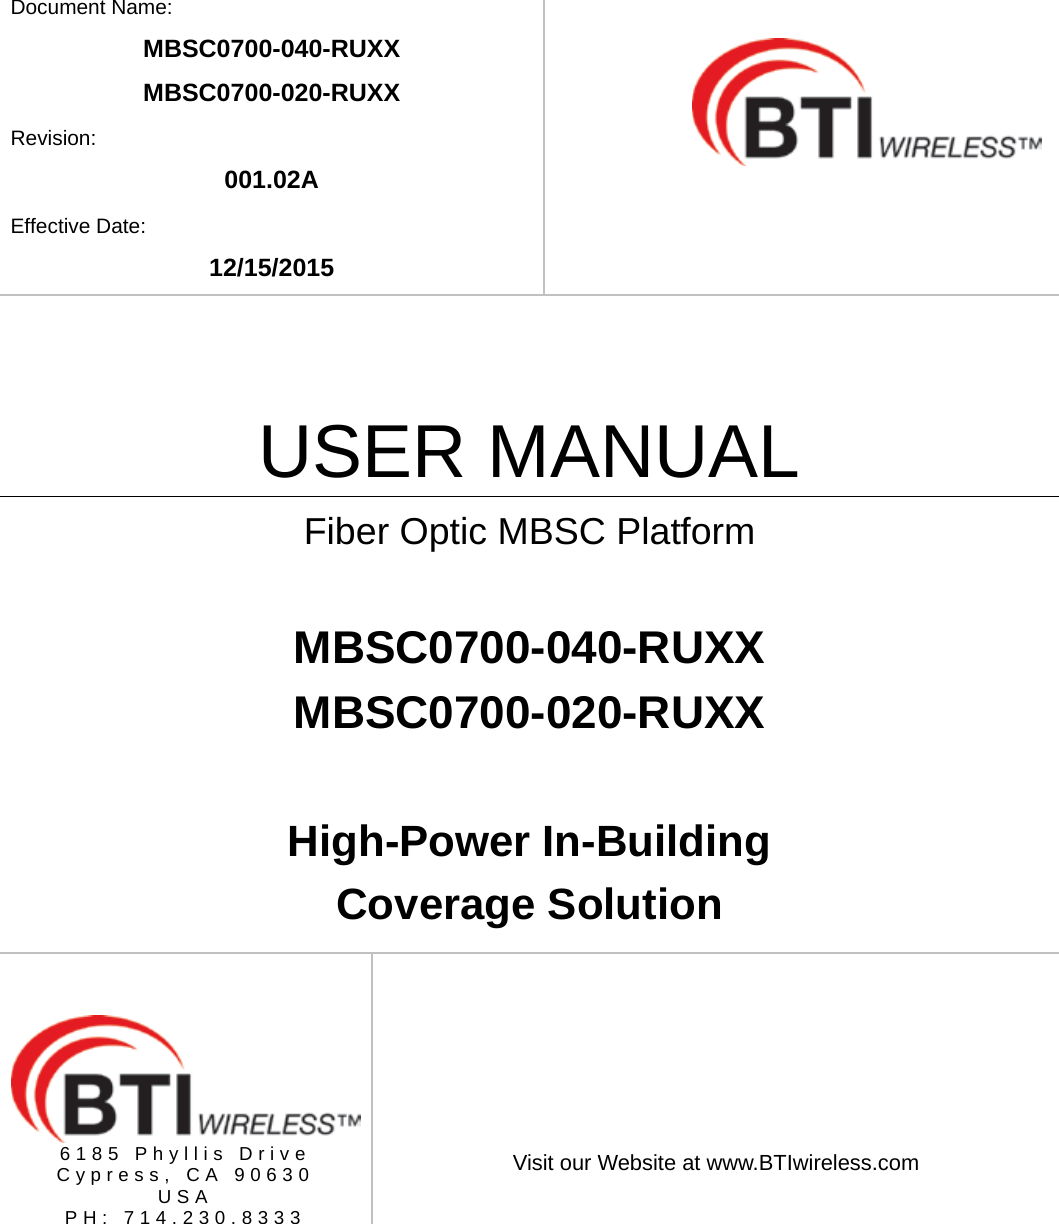    Document Name: MBSC0700-040-RUXX MBSC0700-020-RUXX Revision: 001.02A Effective Date: 12/15/2015    USER MANUAL Fiber Optic MBSC Platform  MBSC0700-040-RUXX MBSC0700-020-RUXX  High-Power In-Building Coverage Solution       6185 Phyllis Drive Cypress, CA 90630 USA PH: 714.230.8333   Visit our Website at www.BTIwireless.com 